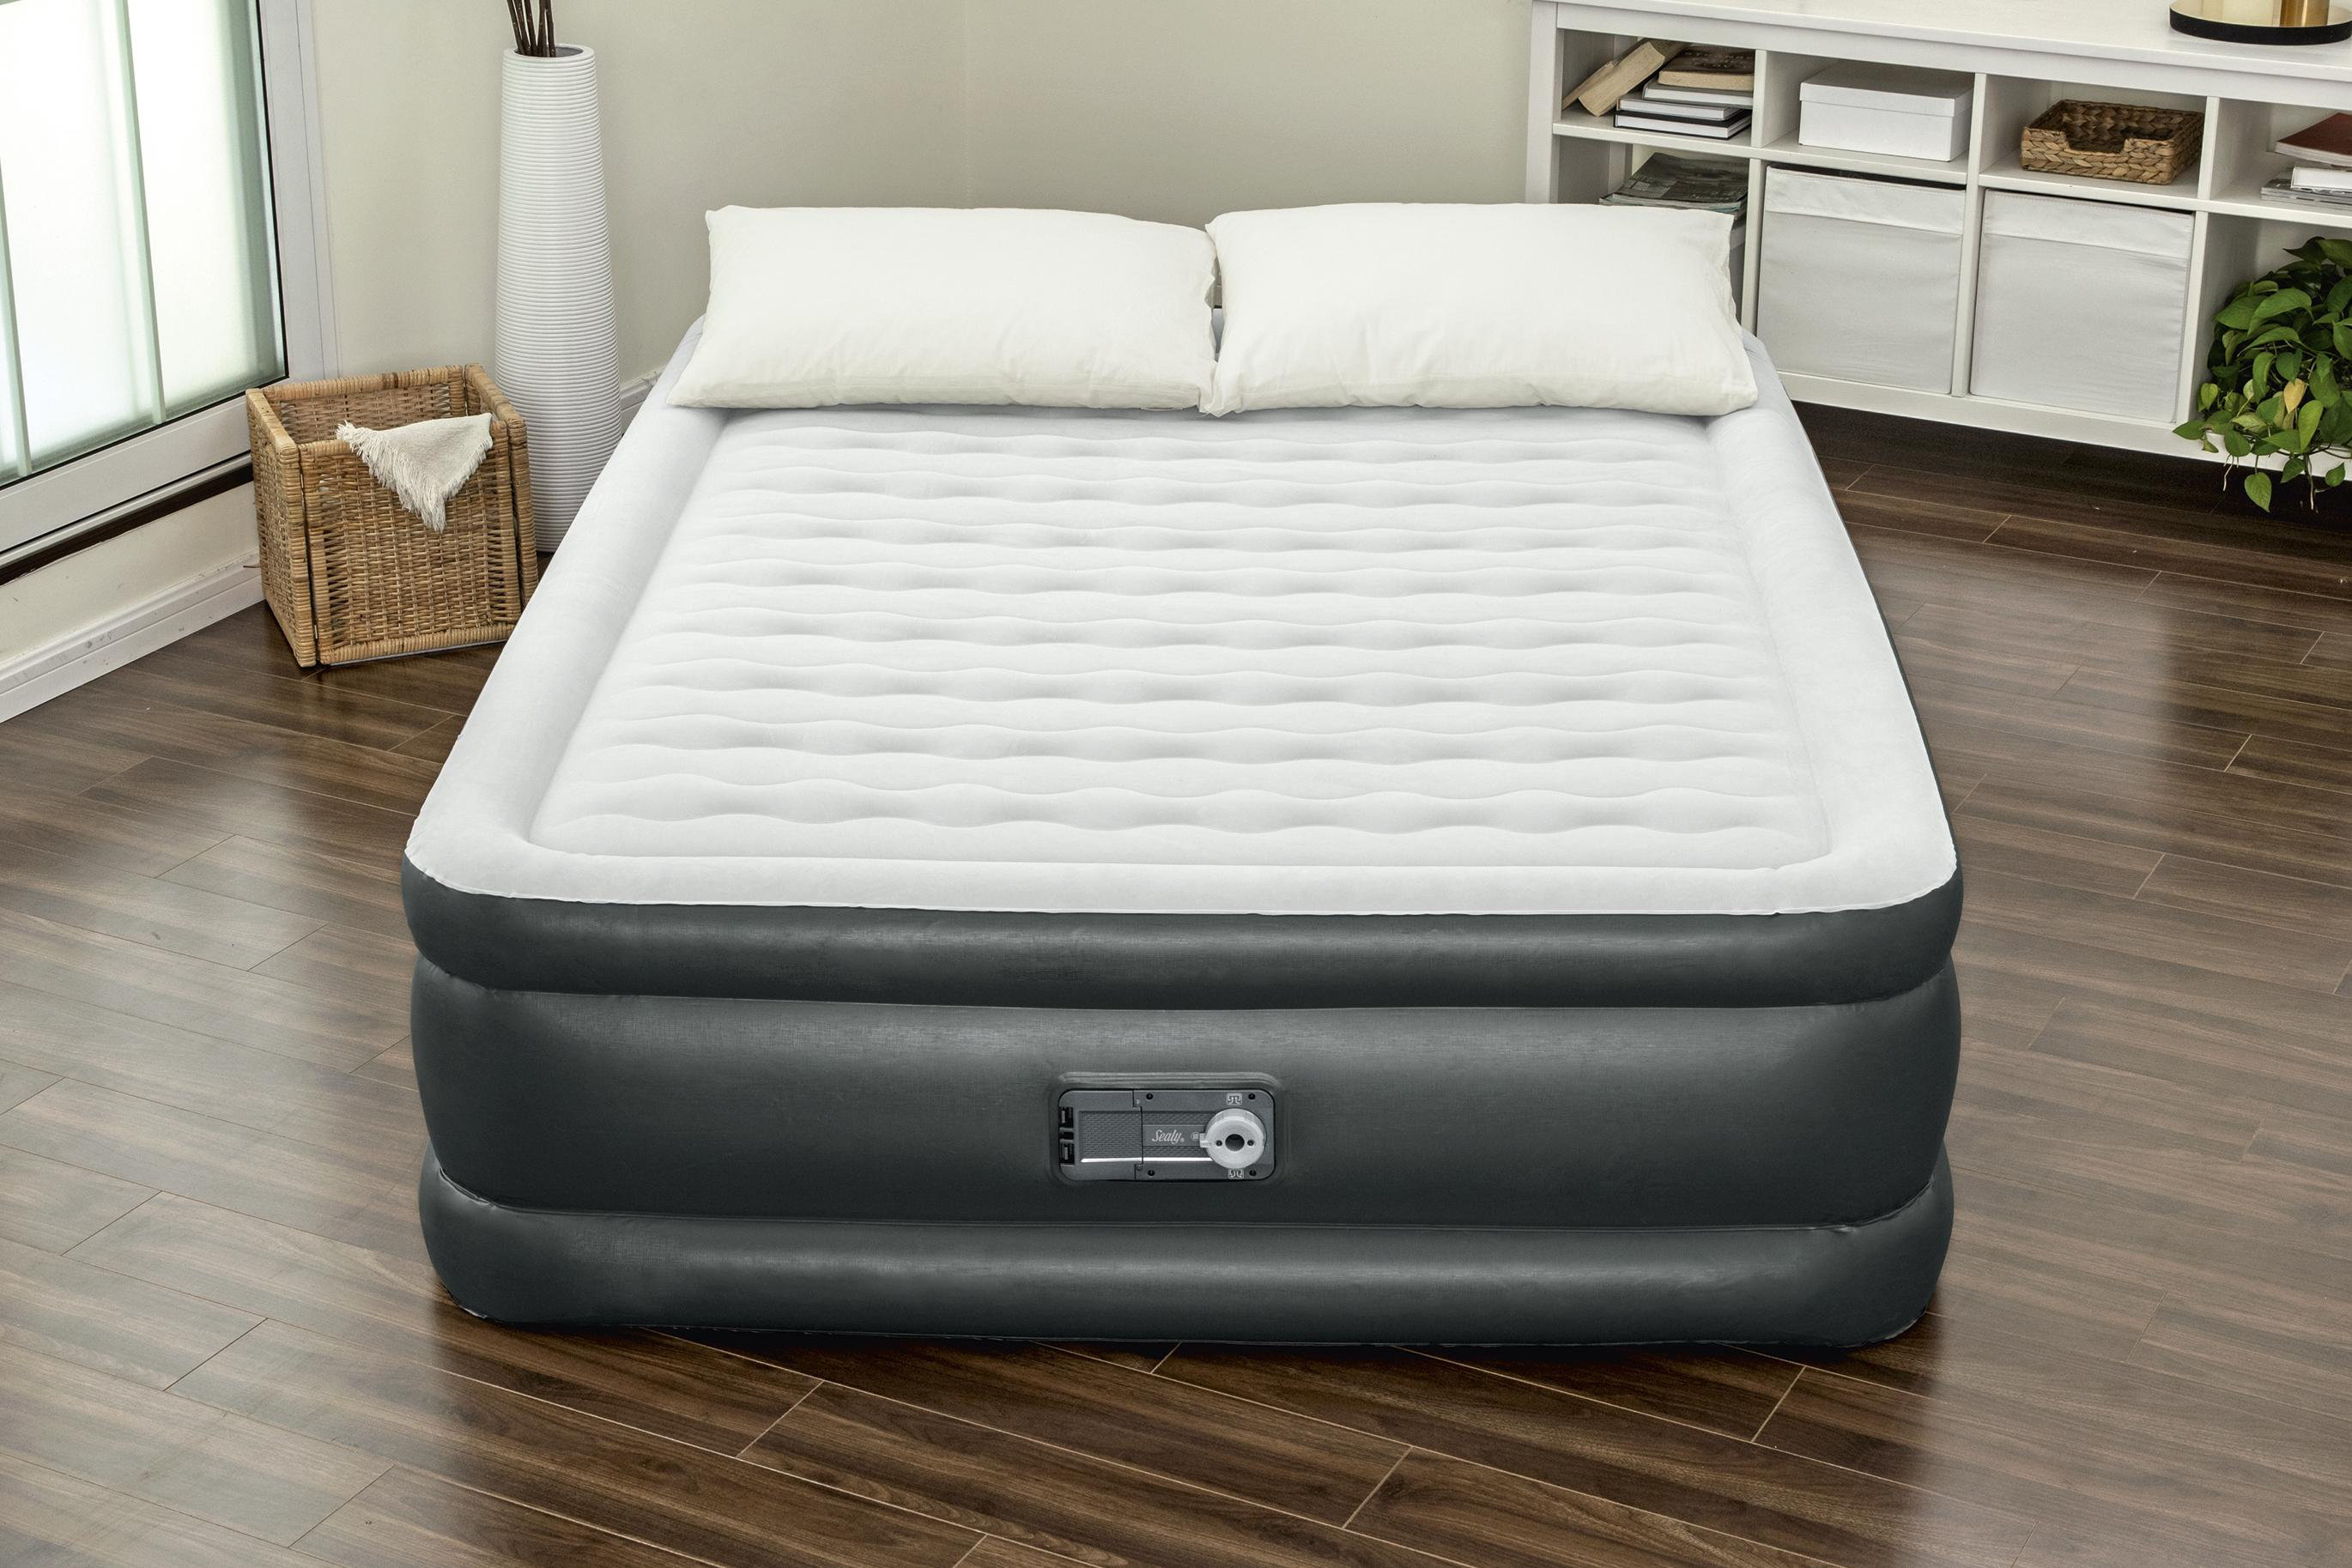 Flocking Inflatable PVC Air Beds Mattresses for Home Indoor and